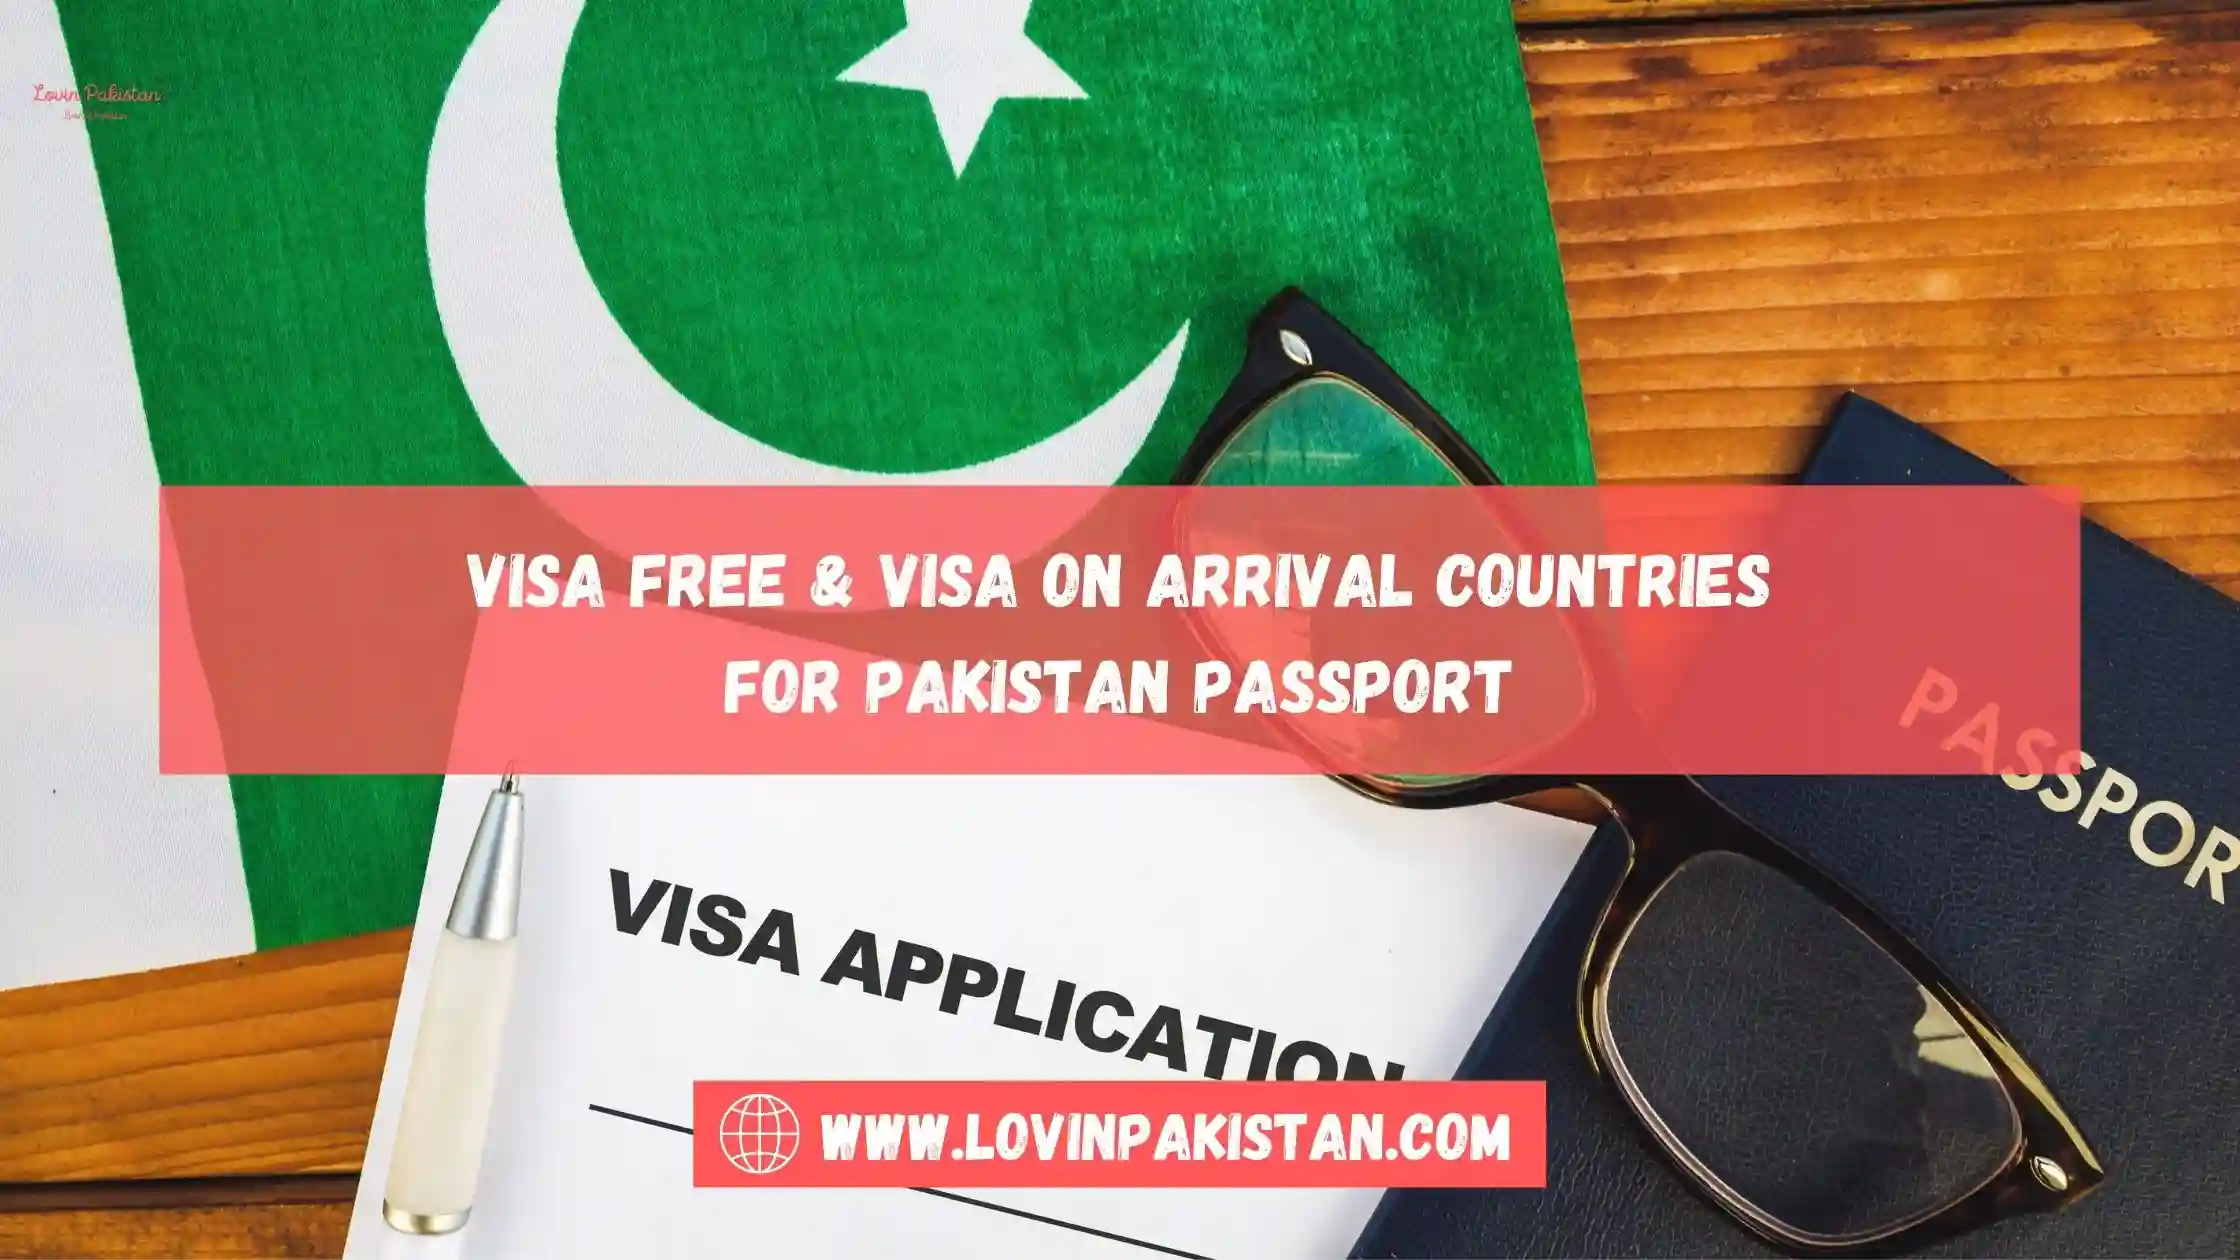 Visa Free and Visa on Arrival Countries For Pakistan